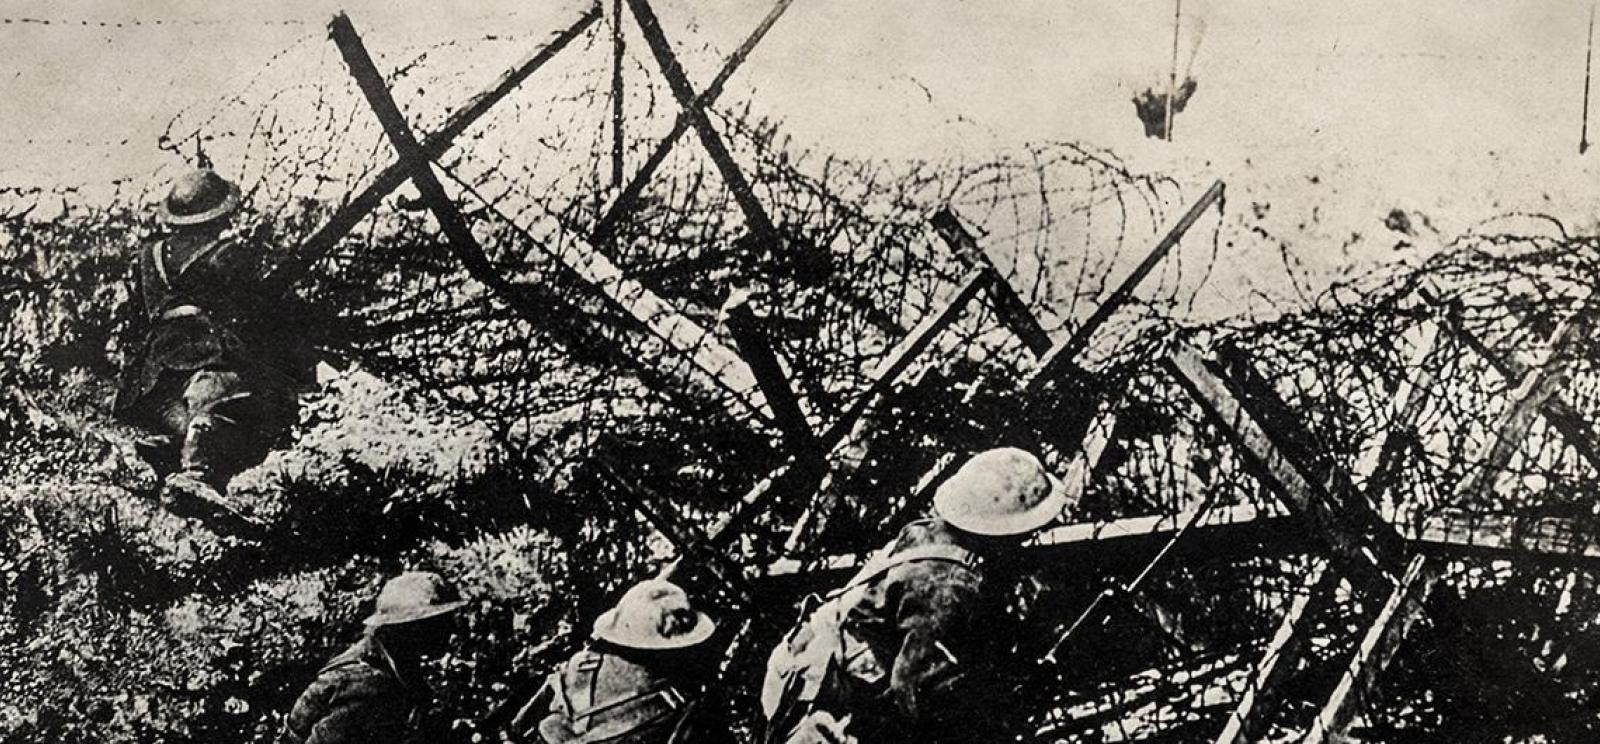 Black and white photograph of a tangle of barbed wire and wooden posts atop a trench through which several soldiers are creeping.